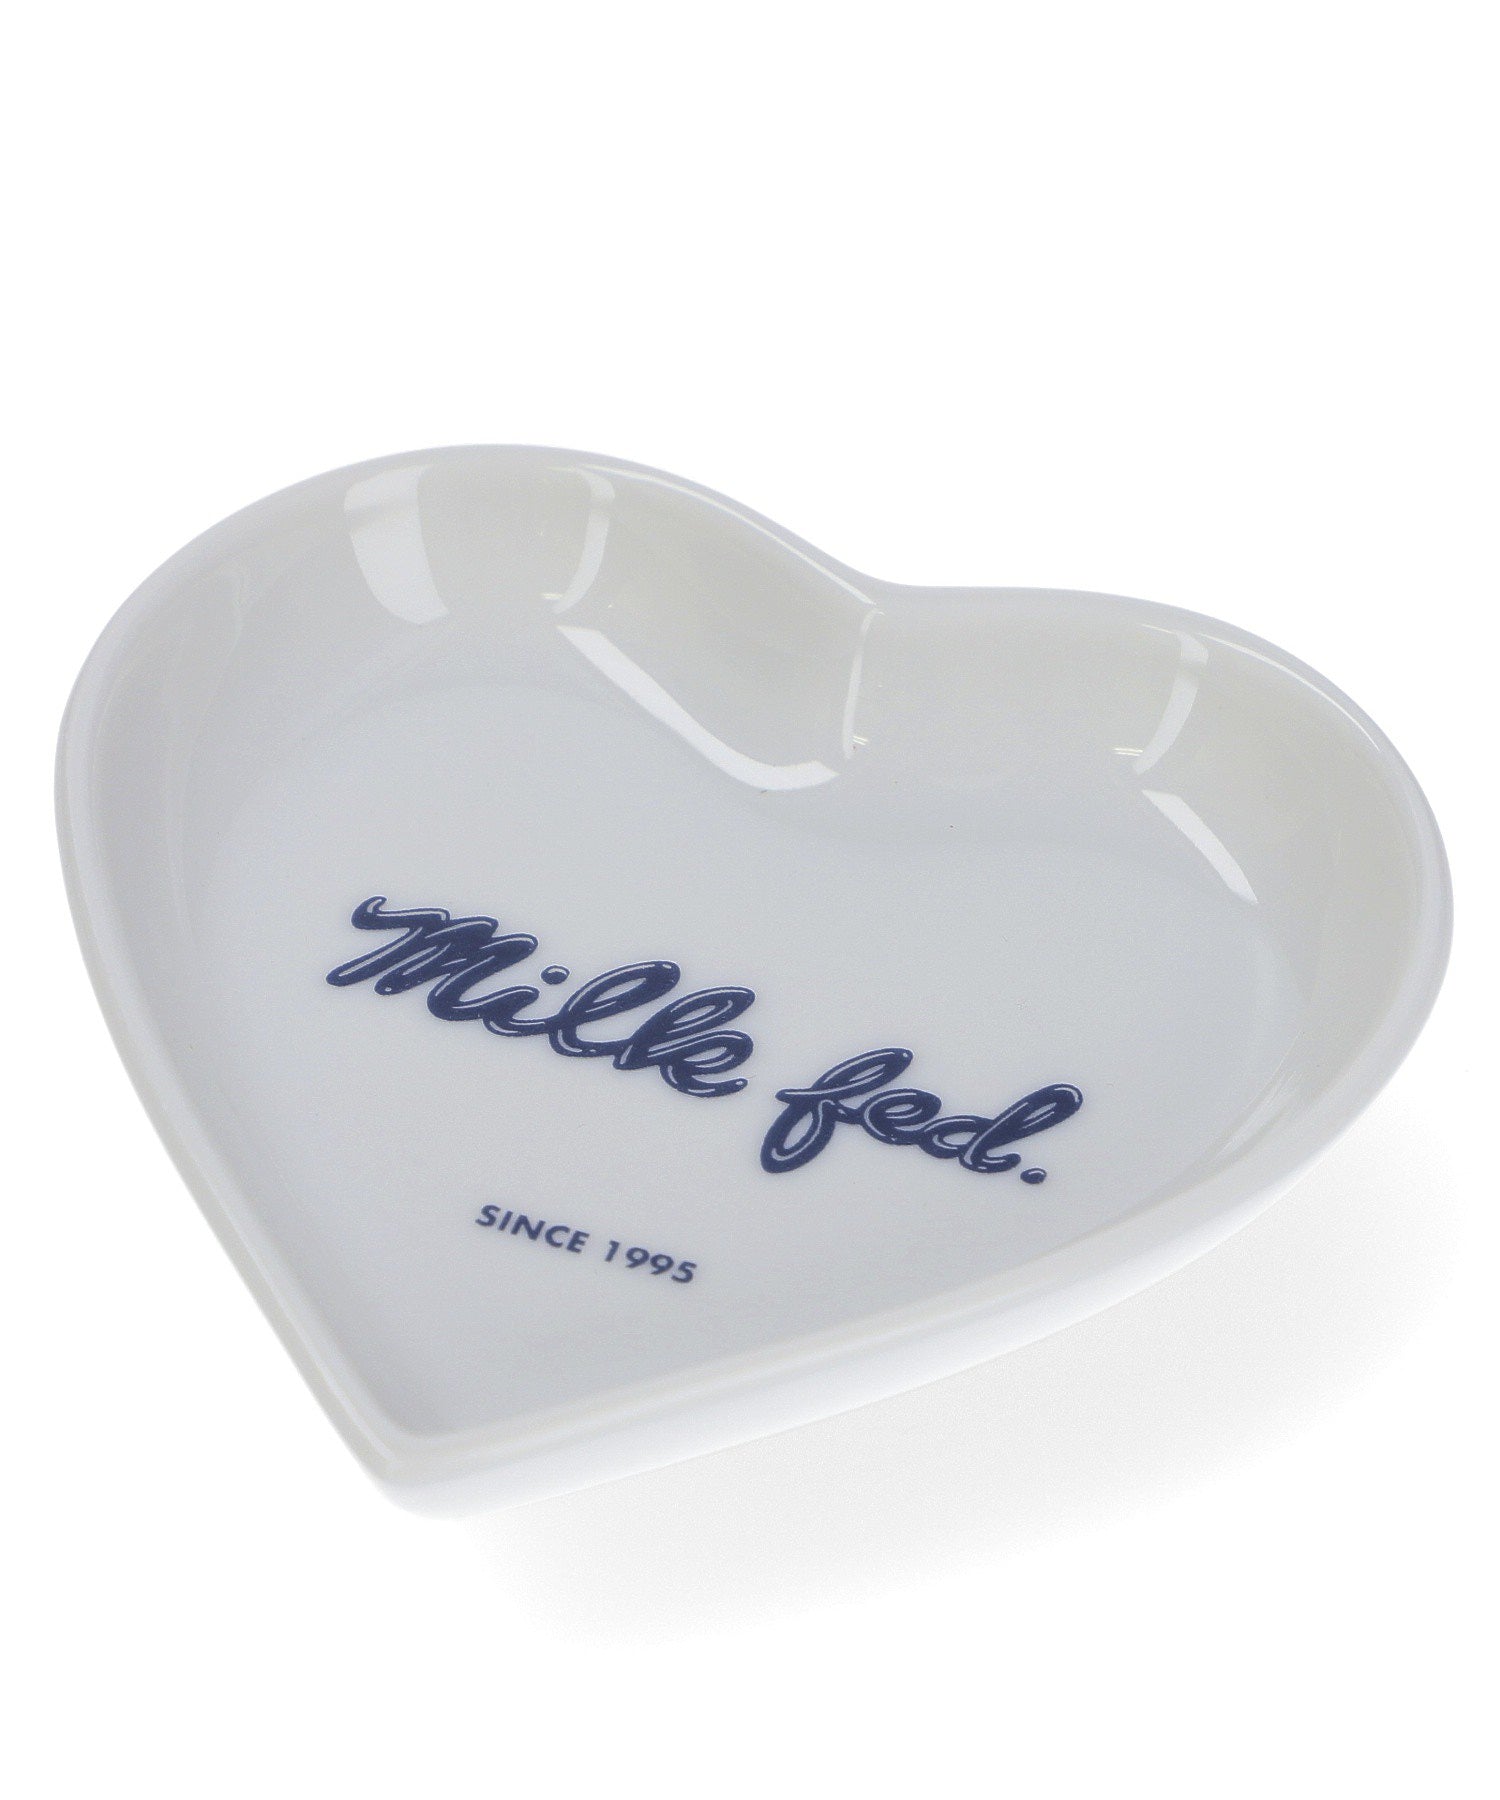 ICING LOGO HEART SMALL PLATE